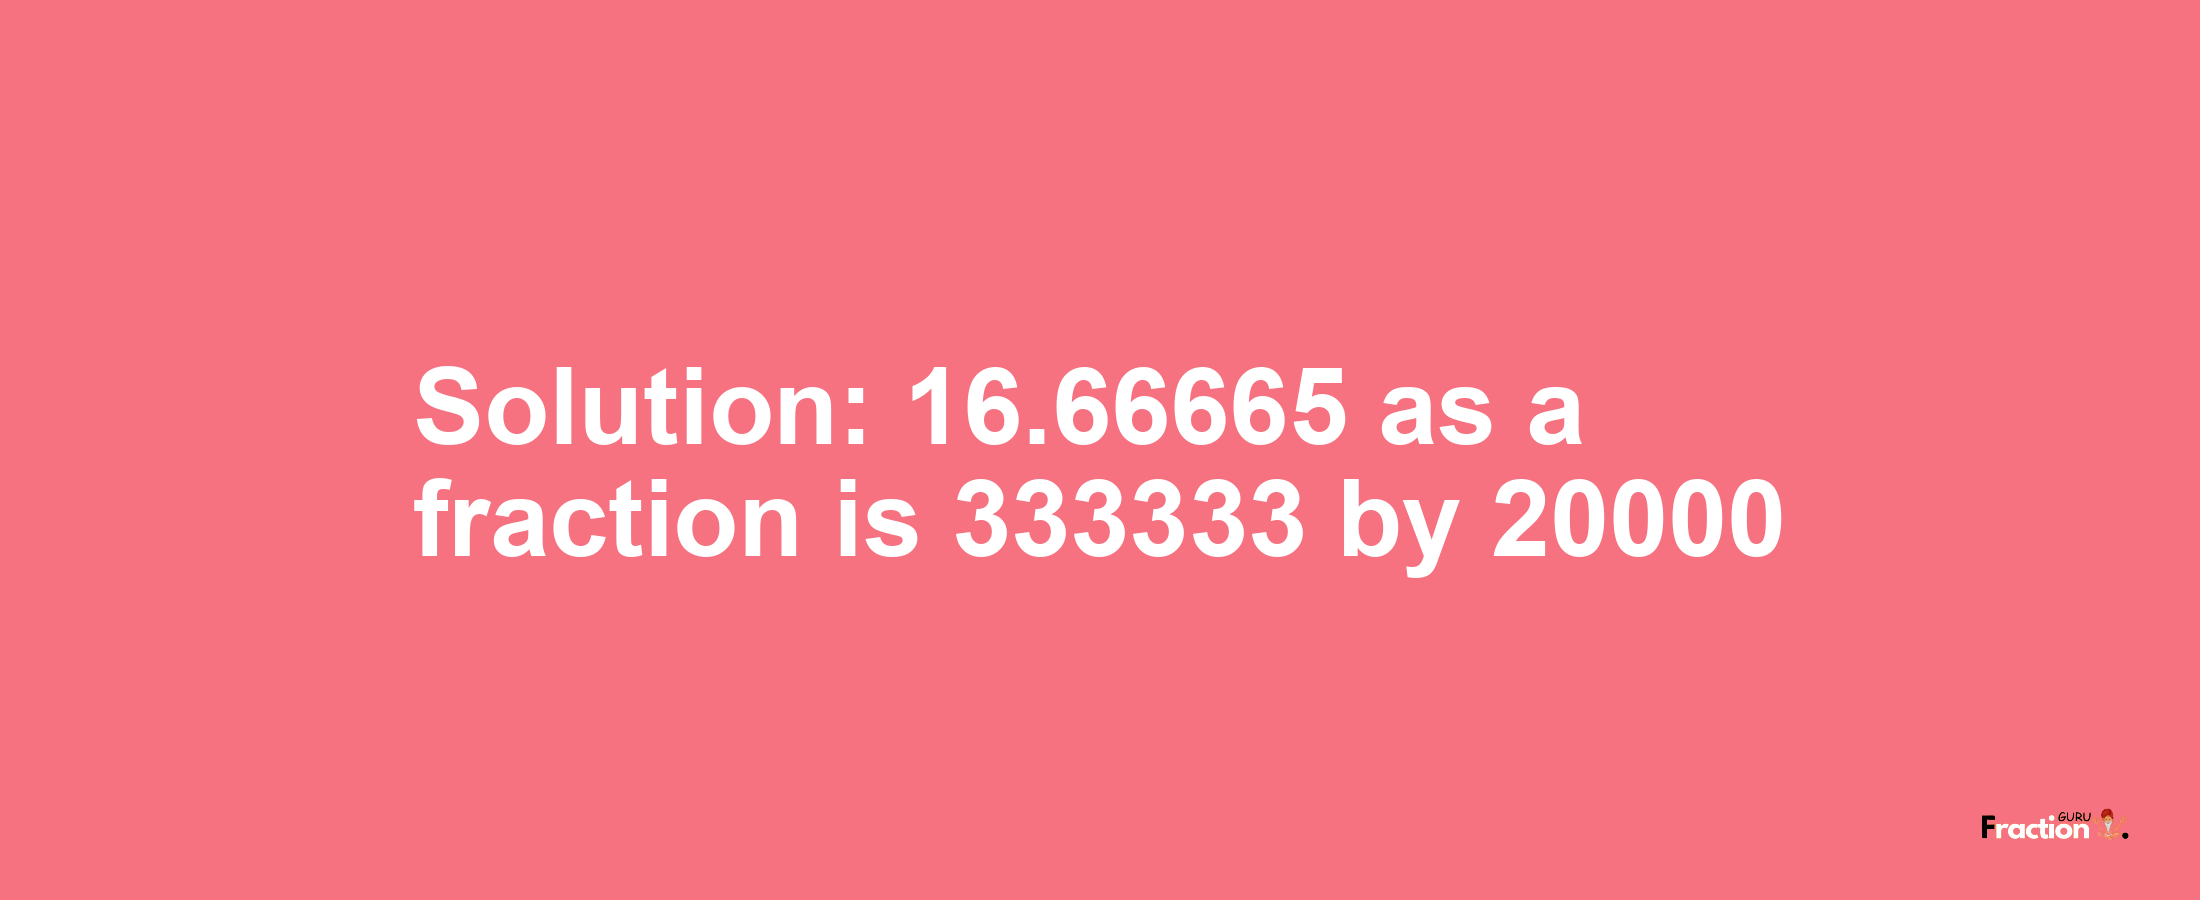 Solution:16.66665 as a fraction is 333333/20000